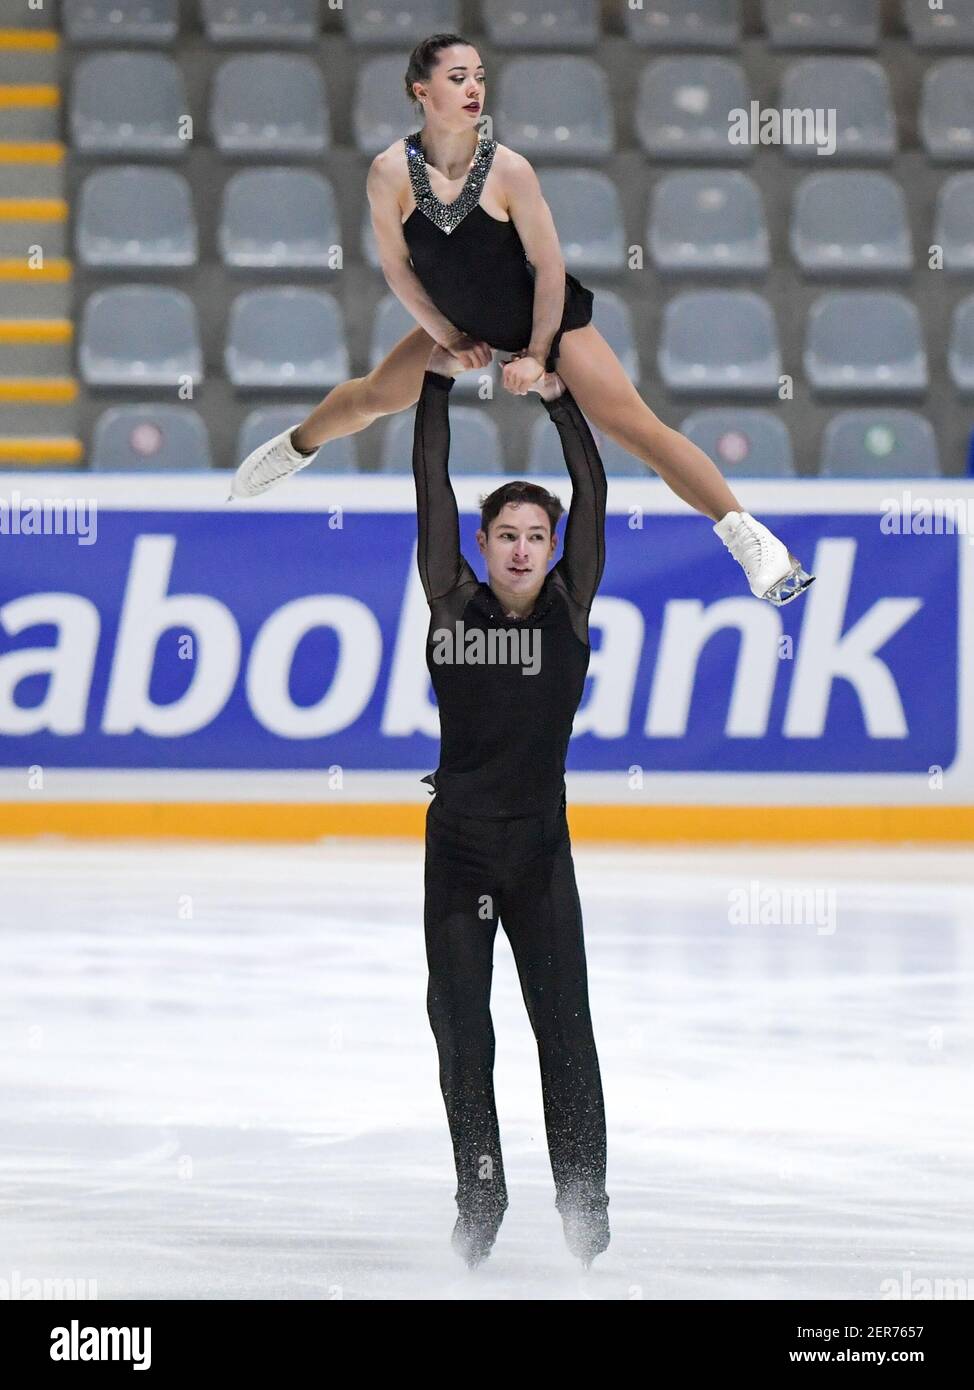 THE HAGUE, NETHERLANDS - FEBRUARY 28: Dorota Broda and Pedro Betegon of Spain compete in the figure skating pairs free skate program on Day 4 during t Stock Photo